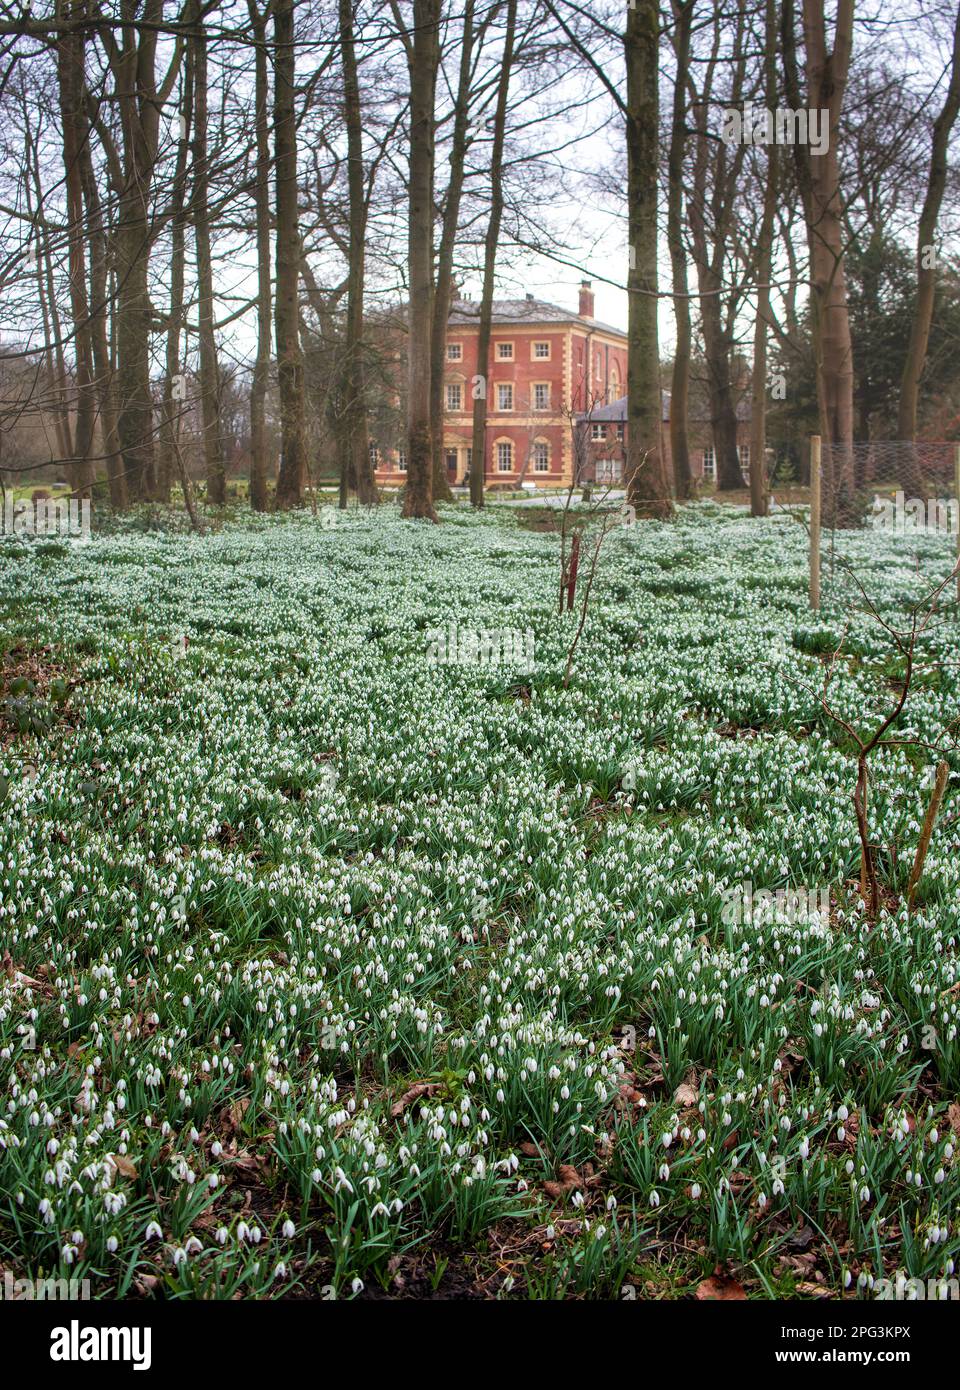 Snowdrops in the grounds of Lytham Hall, with the hall in the distance, intentionally blurred through mist and to emphasise distance Stock Photo